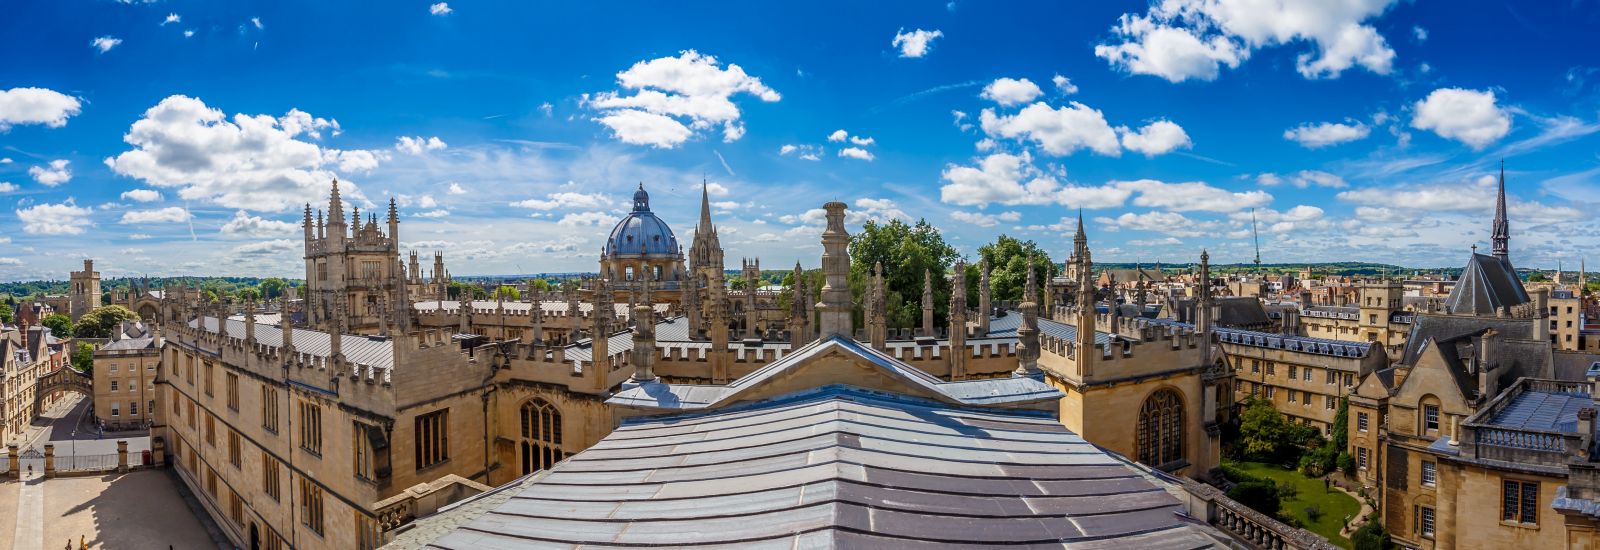 A panorama view of the center of Oxford skyline.